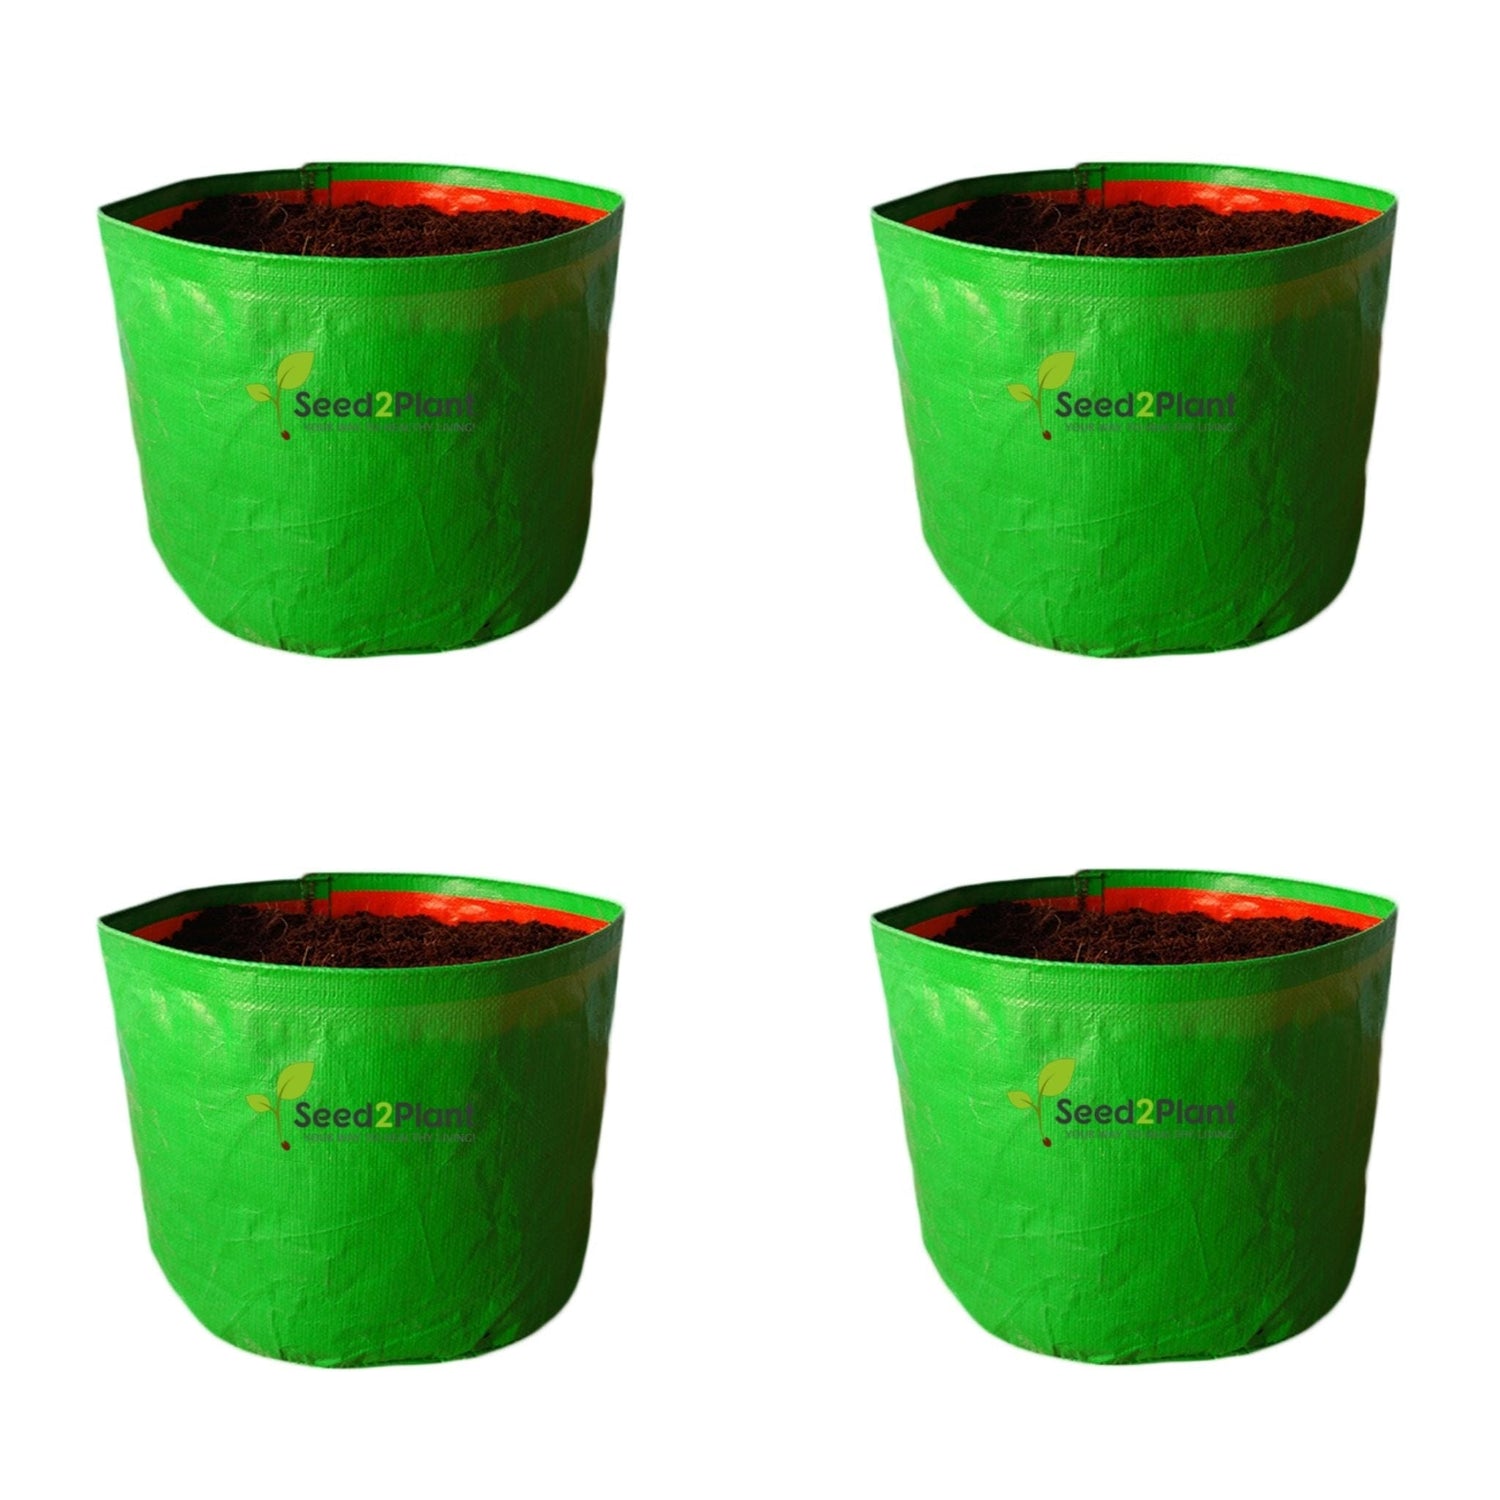 15x12 Inches (1¼x1 Ft) (Pack of 4) - 220 GSM HDPE Round Grow Bag